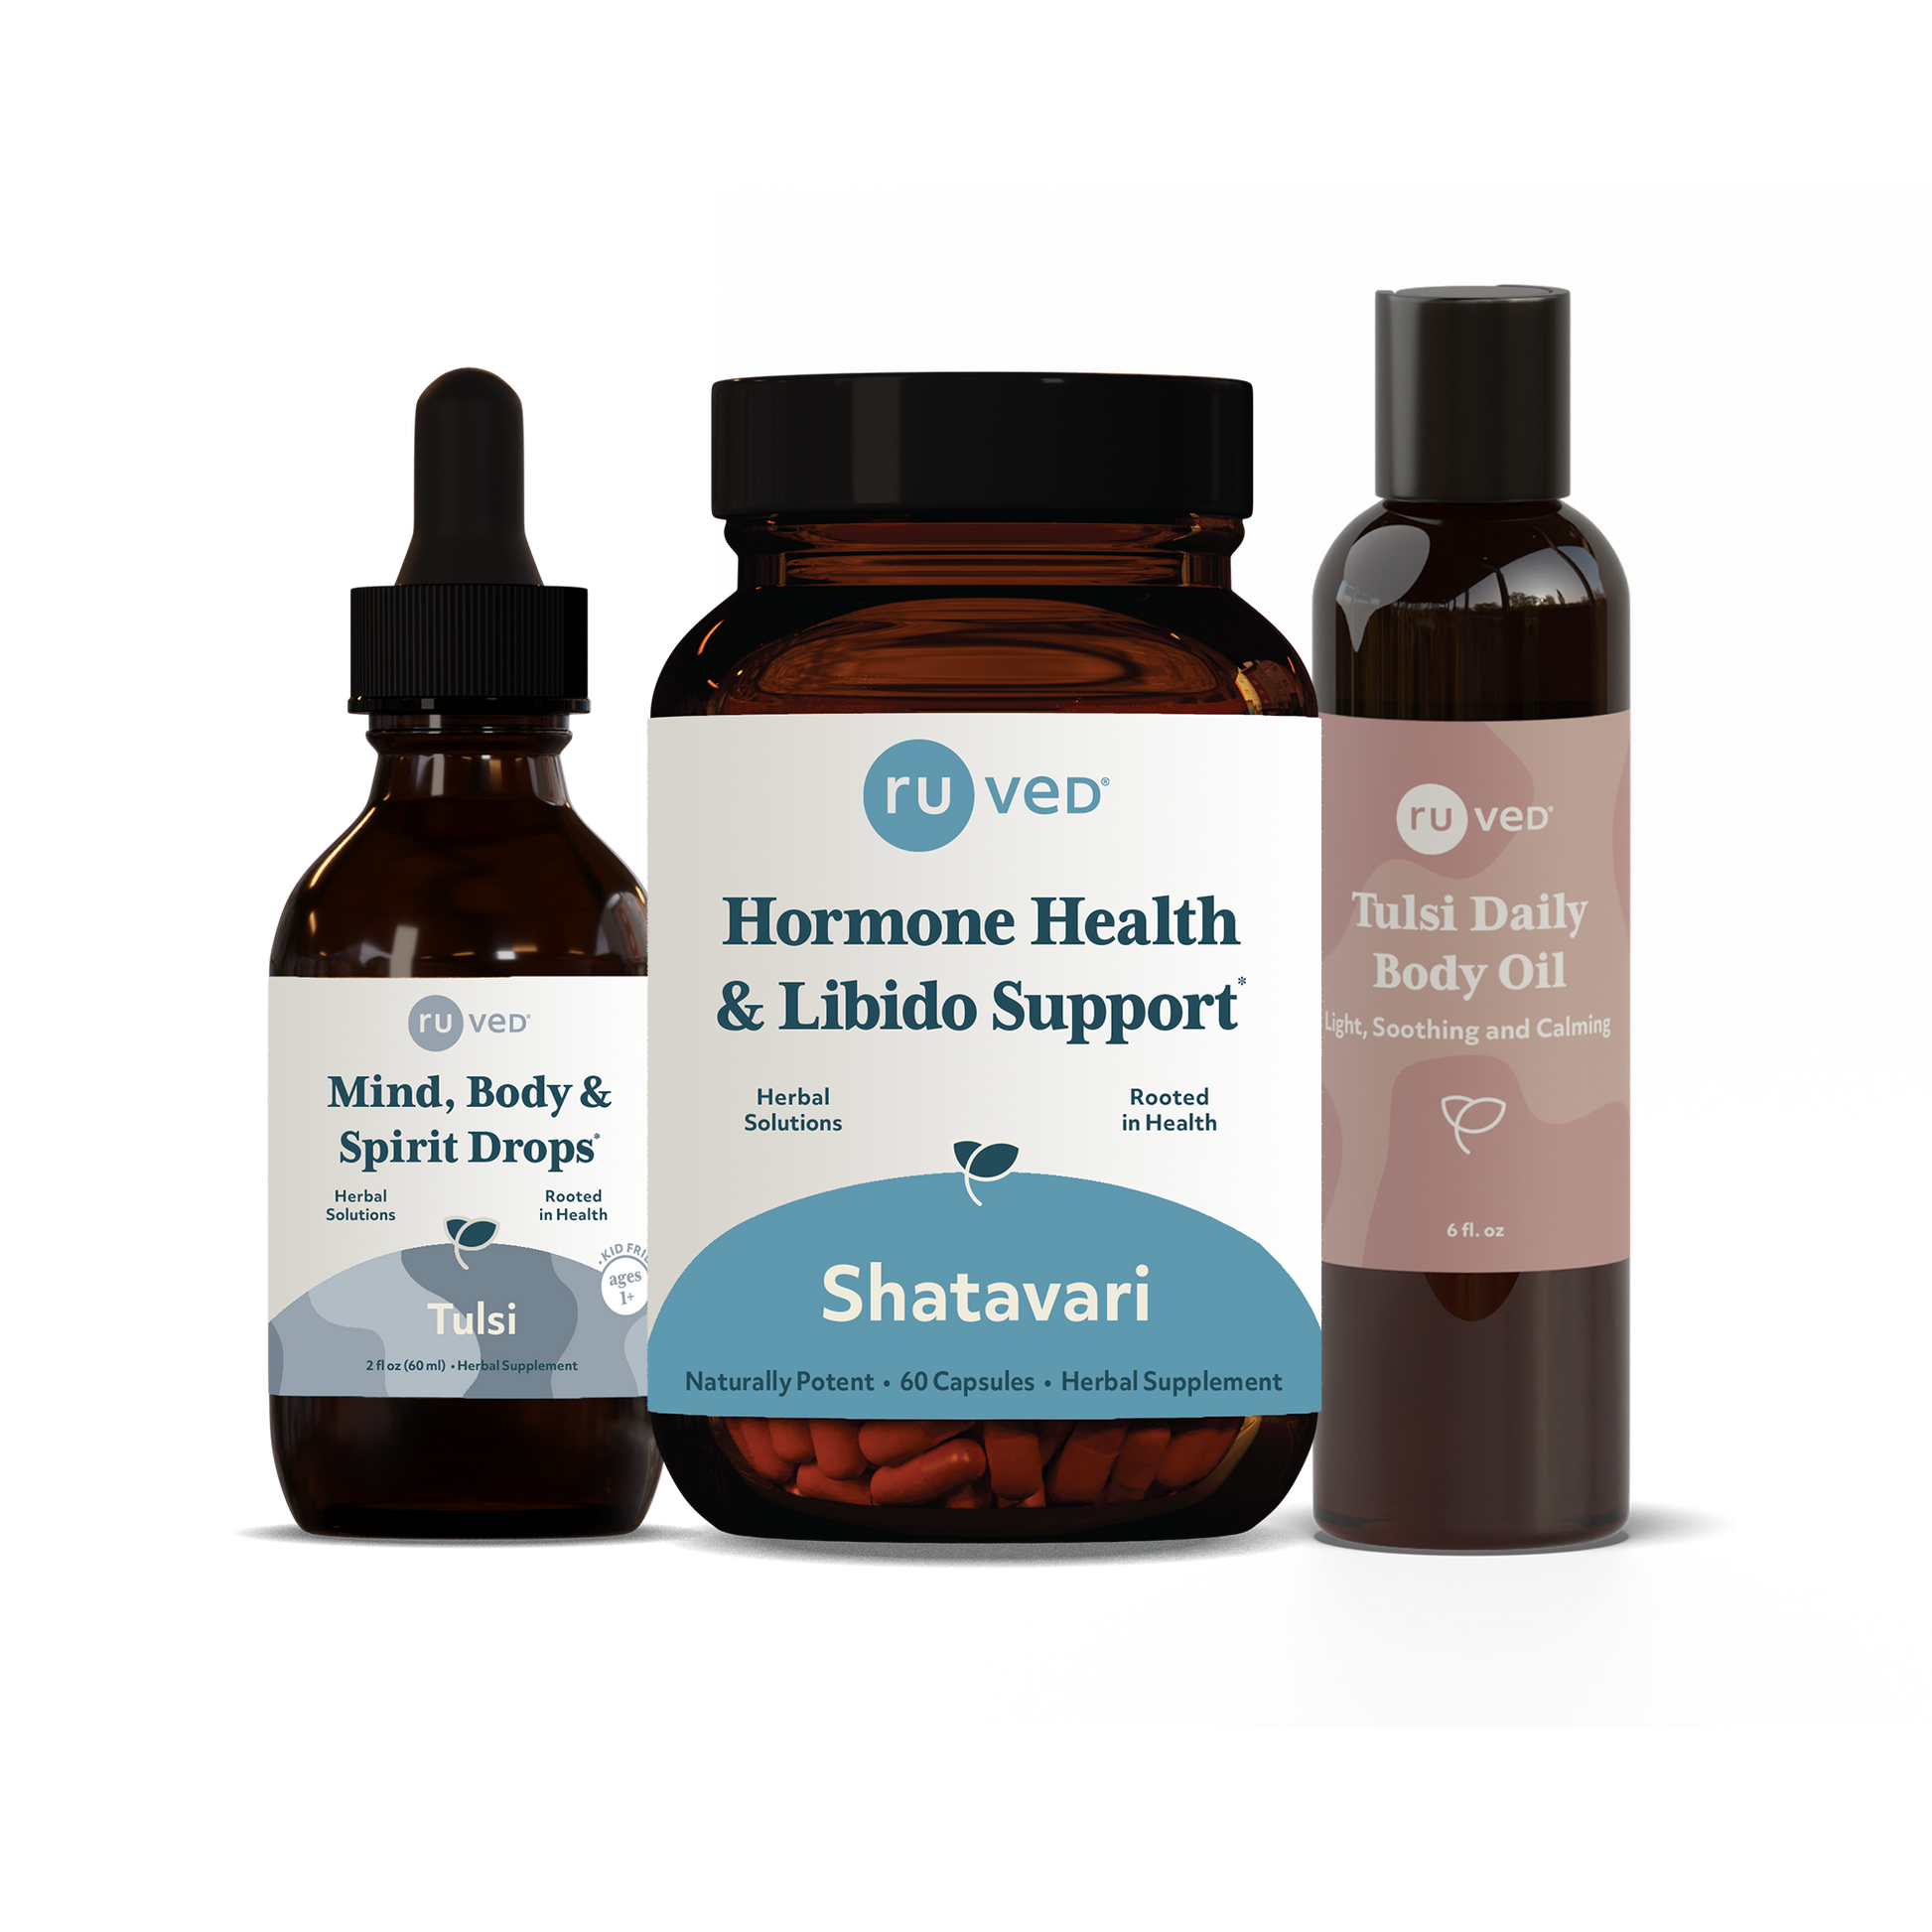 Absolute Radiance Bundle, 60 capsules, 60 ml drops, 6 fl. oz oil. Featuring 3 products: Shatavari, Tulsi Drops, and Tulsi Body Oil for Hormone and Libido Health and Calming Skin Wellness.